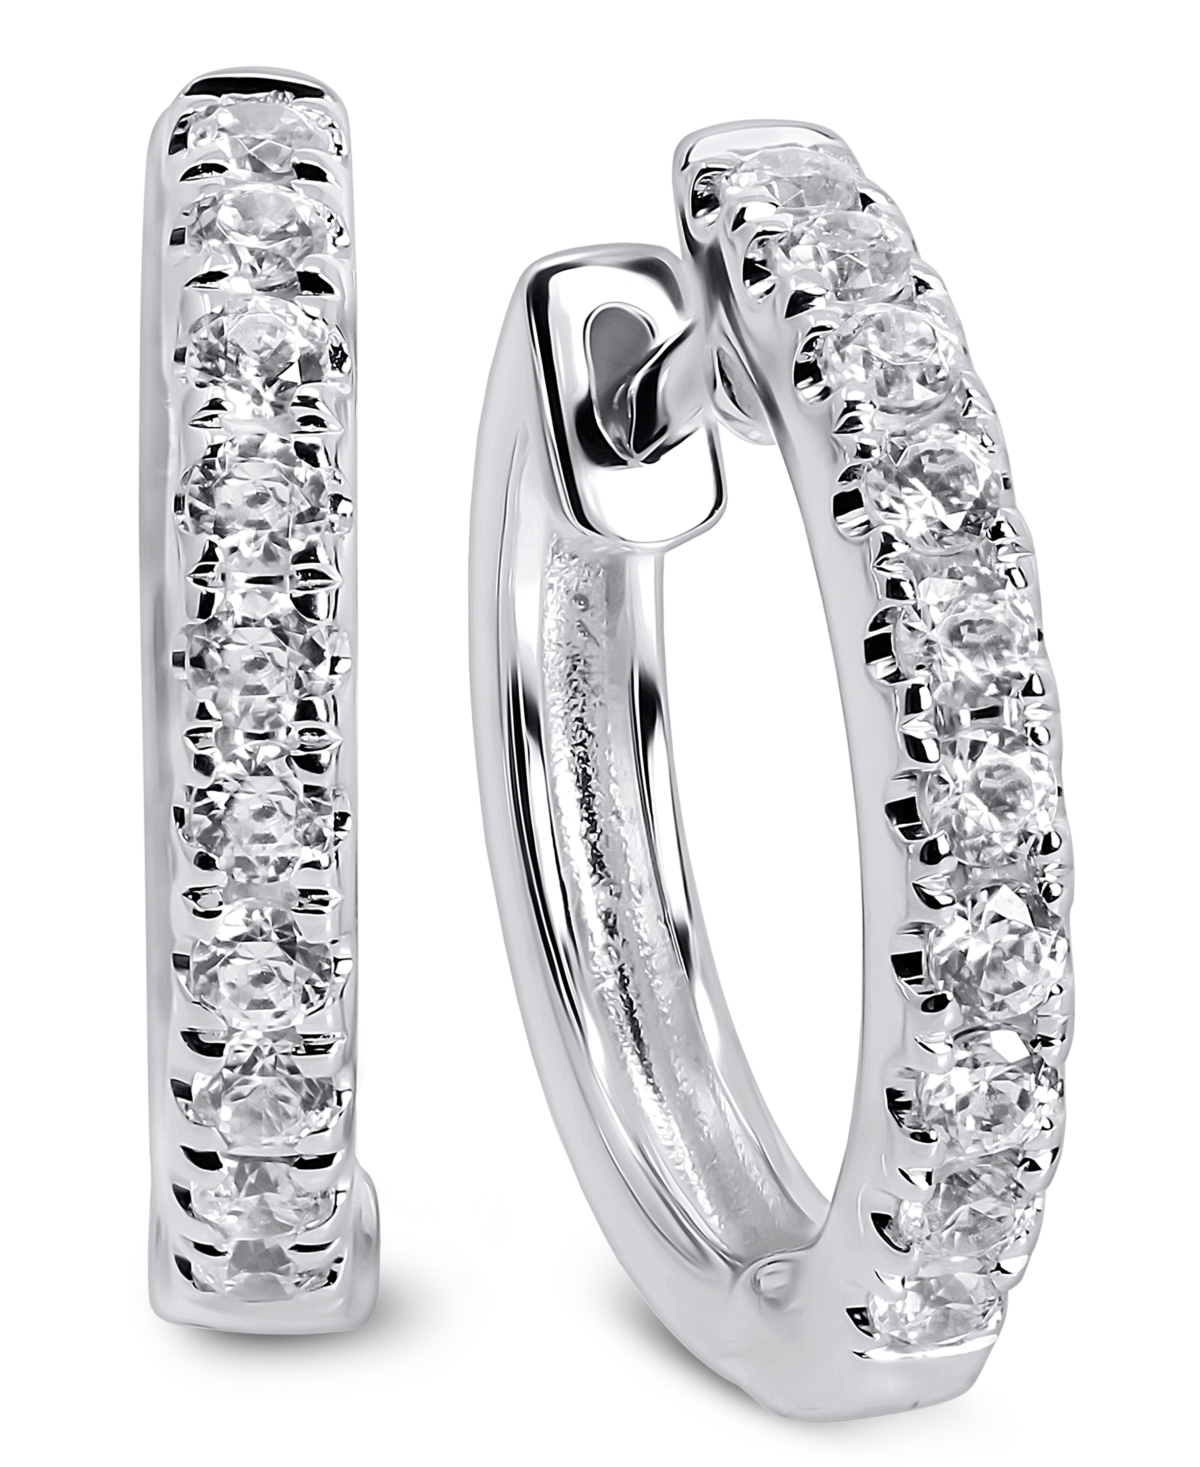 Cubic Zirconia Extra-Small Huggie Hoop Earrings in 14k White Gold, 0.47" - White Gold